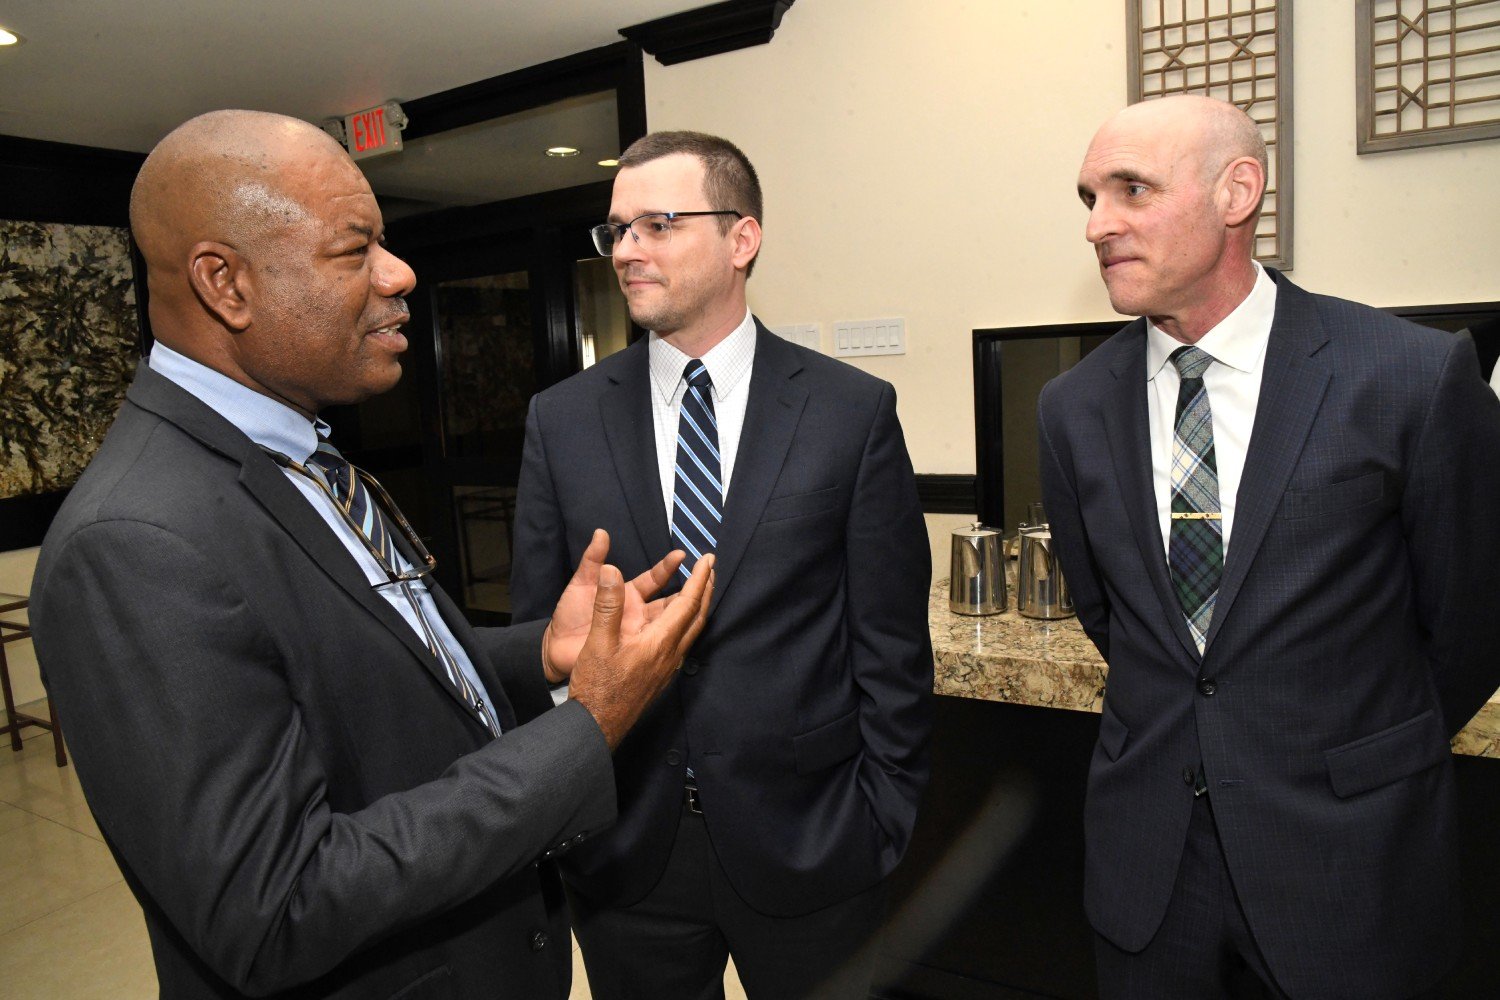 Calabar Principal Albert Corcho in discussion with Mark Wile( VP FACTS) and Mike Wright (Deputy Chief Security Officer, Nelnet)